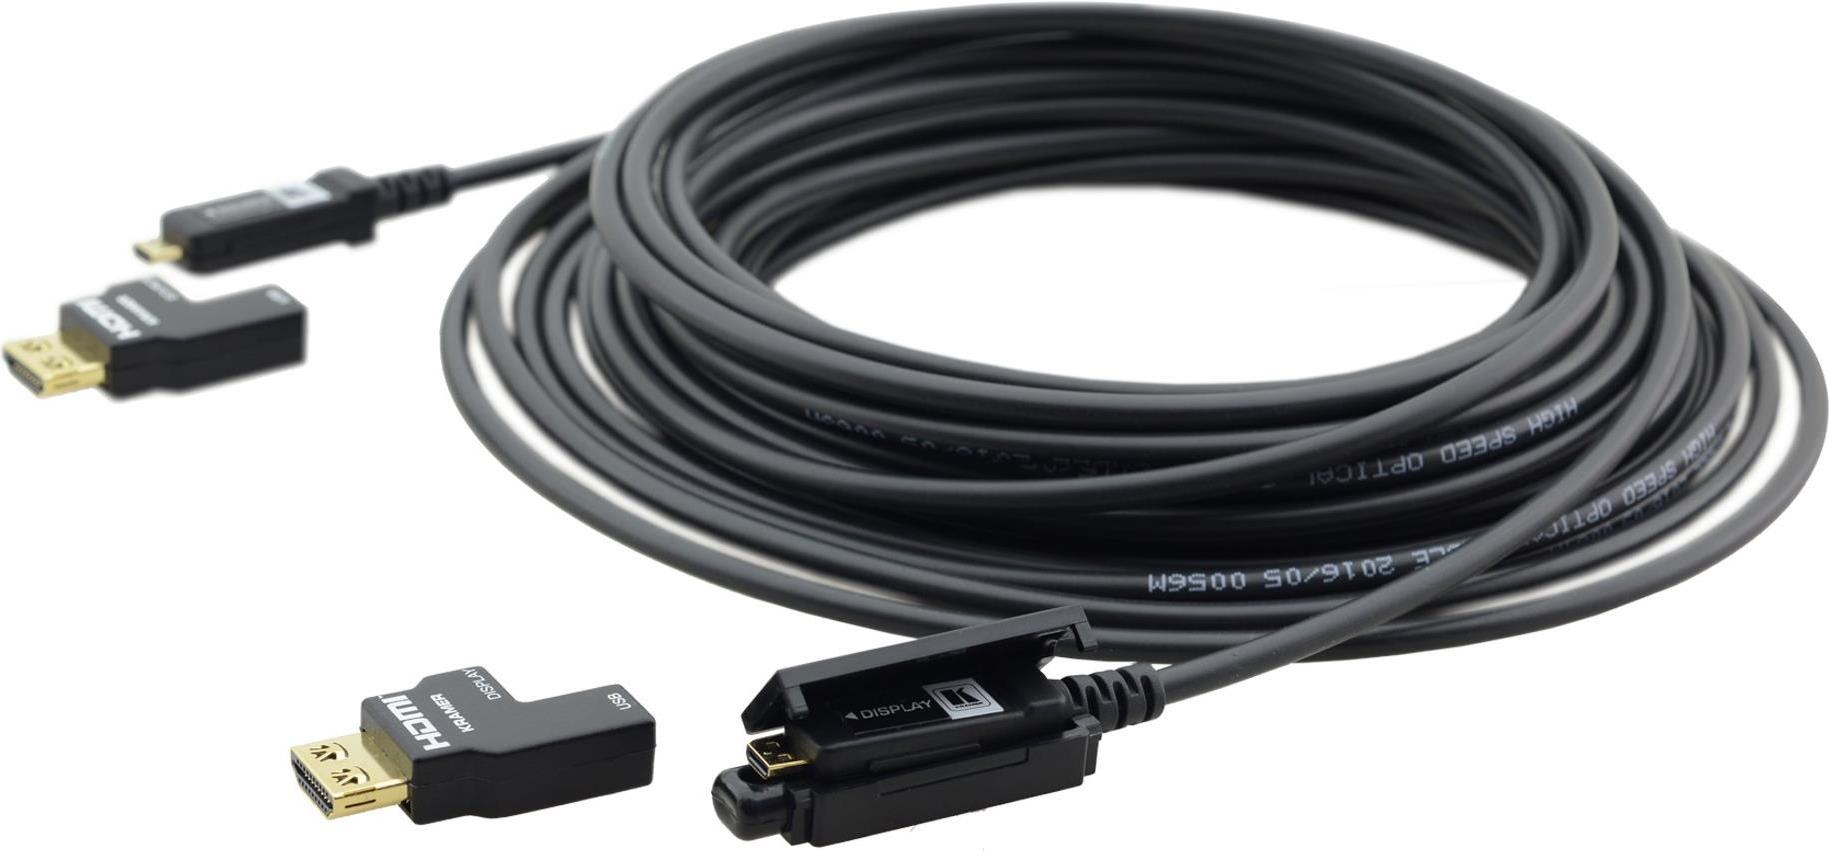 KRAMER ELECTRONICS CRS-AOCH/XL-131 - Rental & Staging Active Optical Pluggable HDMI Cable (97-1403131)